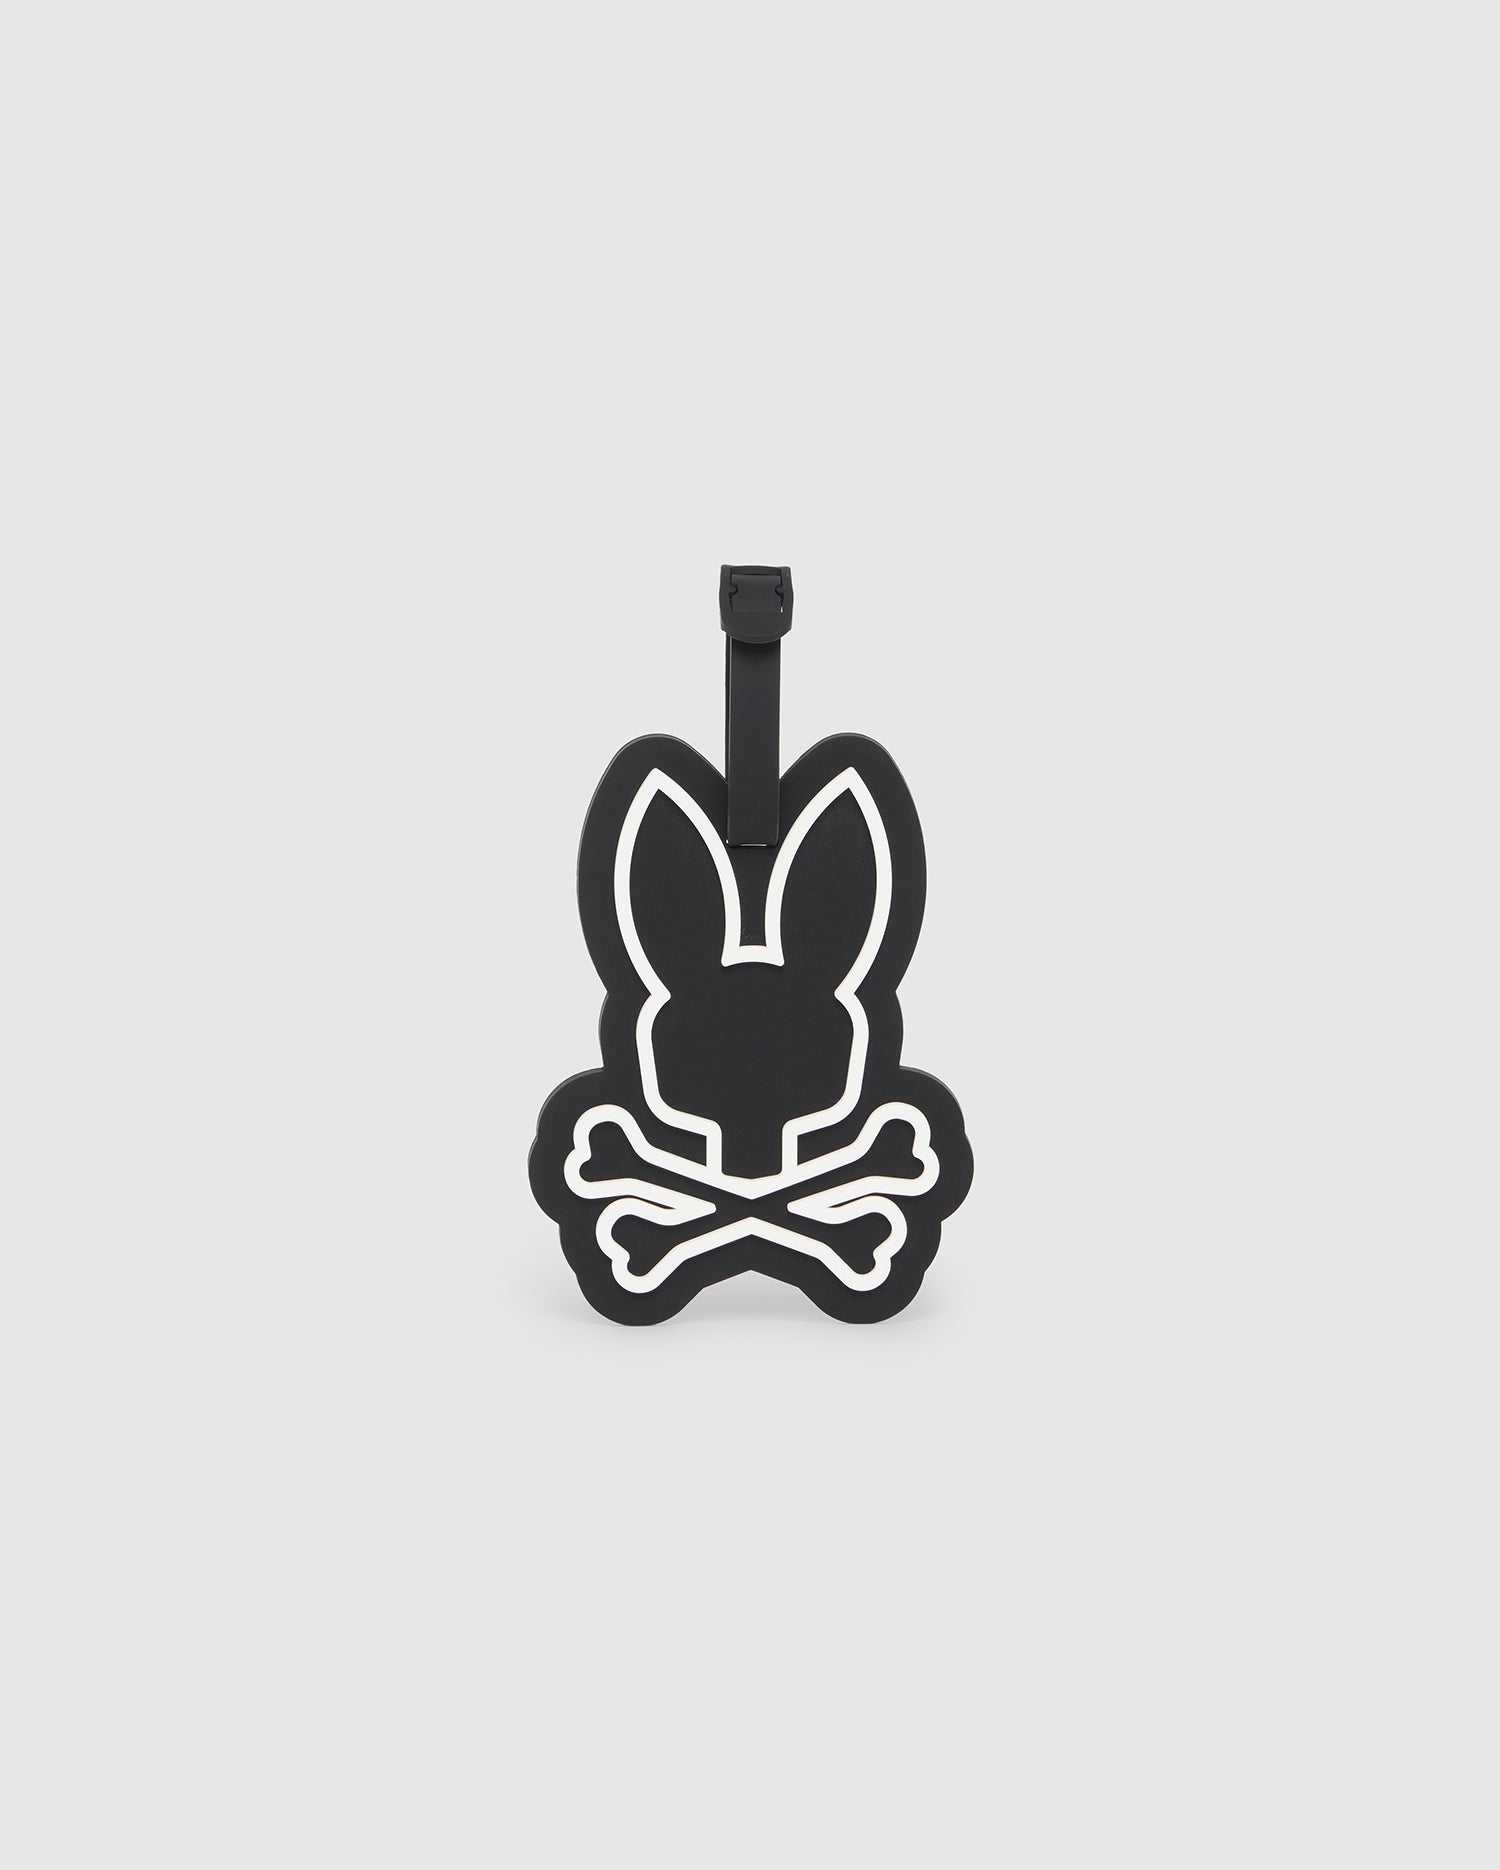 A black, minimalistic Psycho Bunny MENS LUGGAGE TAG - B6A392B200 features an outline of a bunny's head with long ears and crossed bones beneath it. White lines define the shapes, and a black strap at the top allows for easy attachment. The tag includes a silicone body and a transparent slot for your information card.